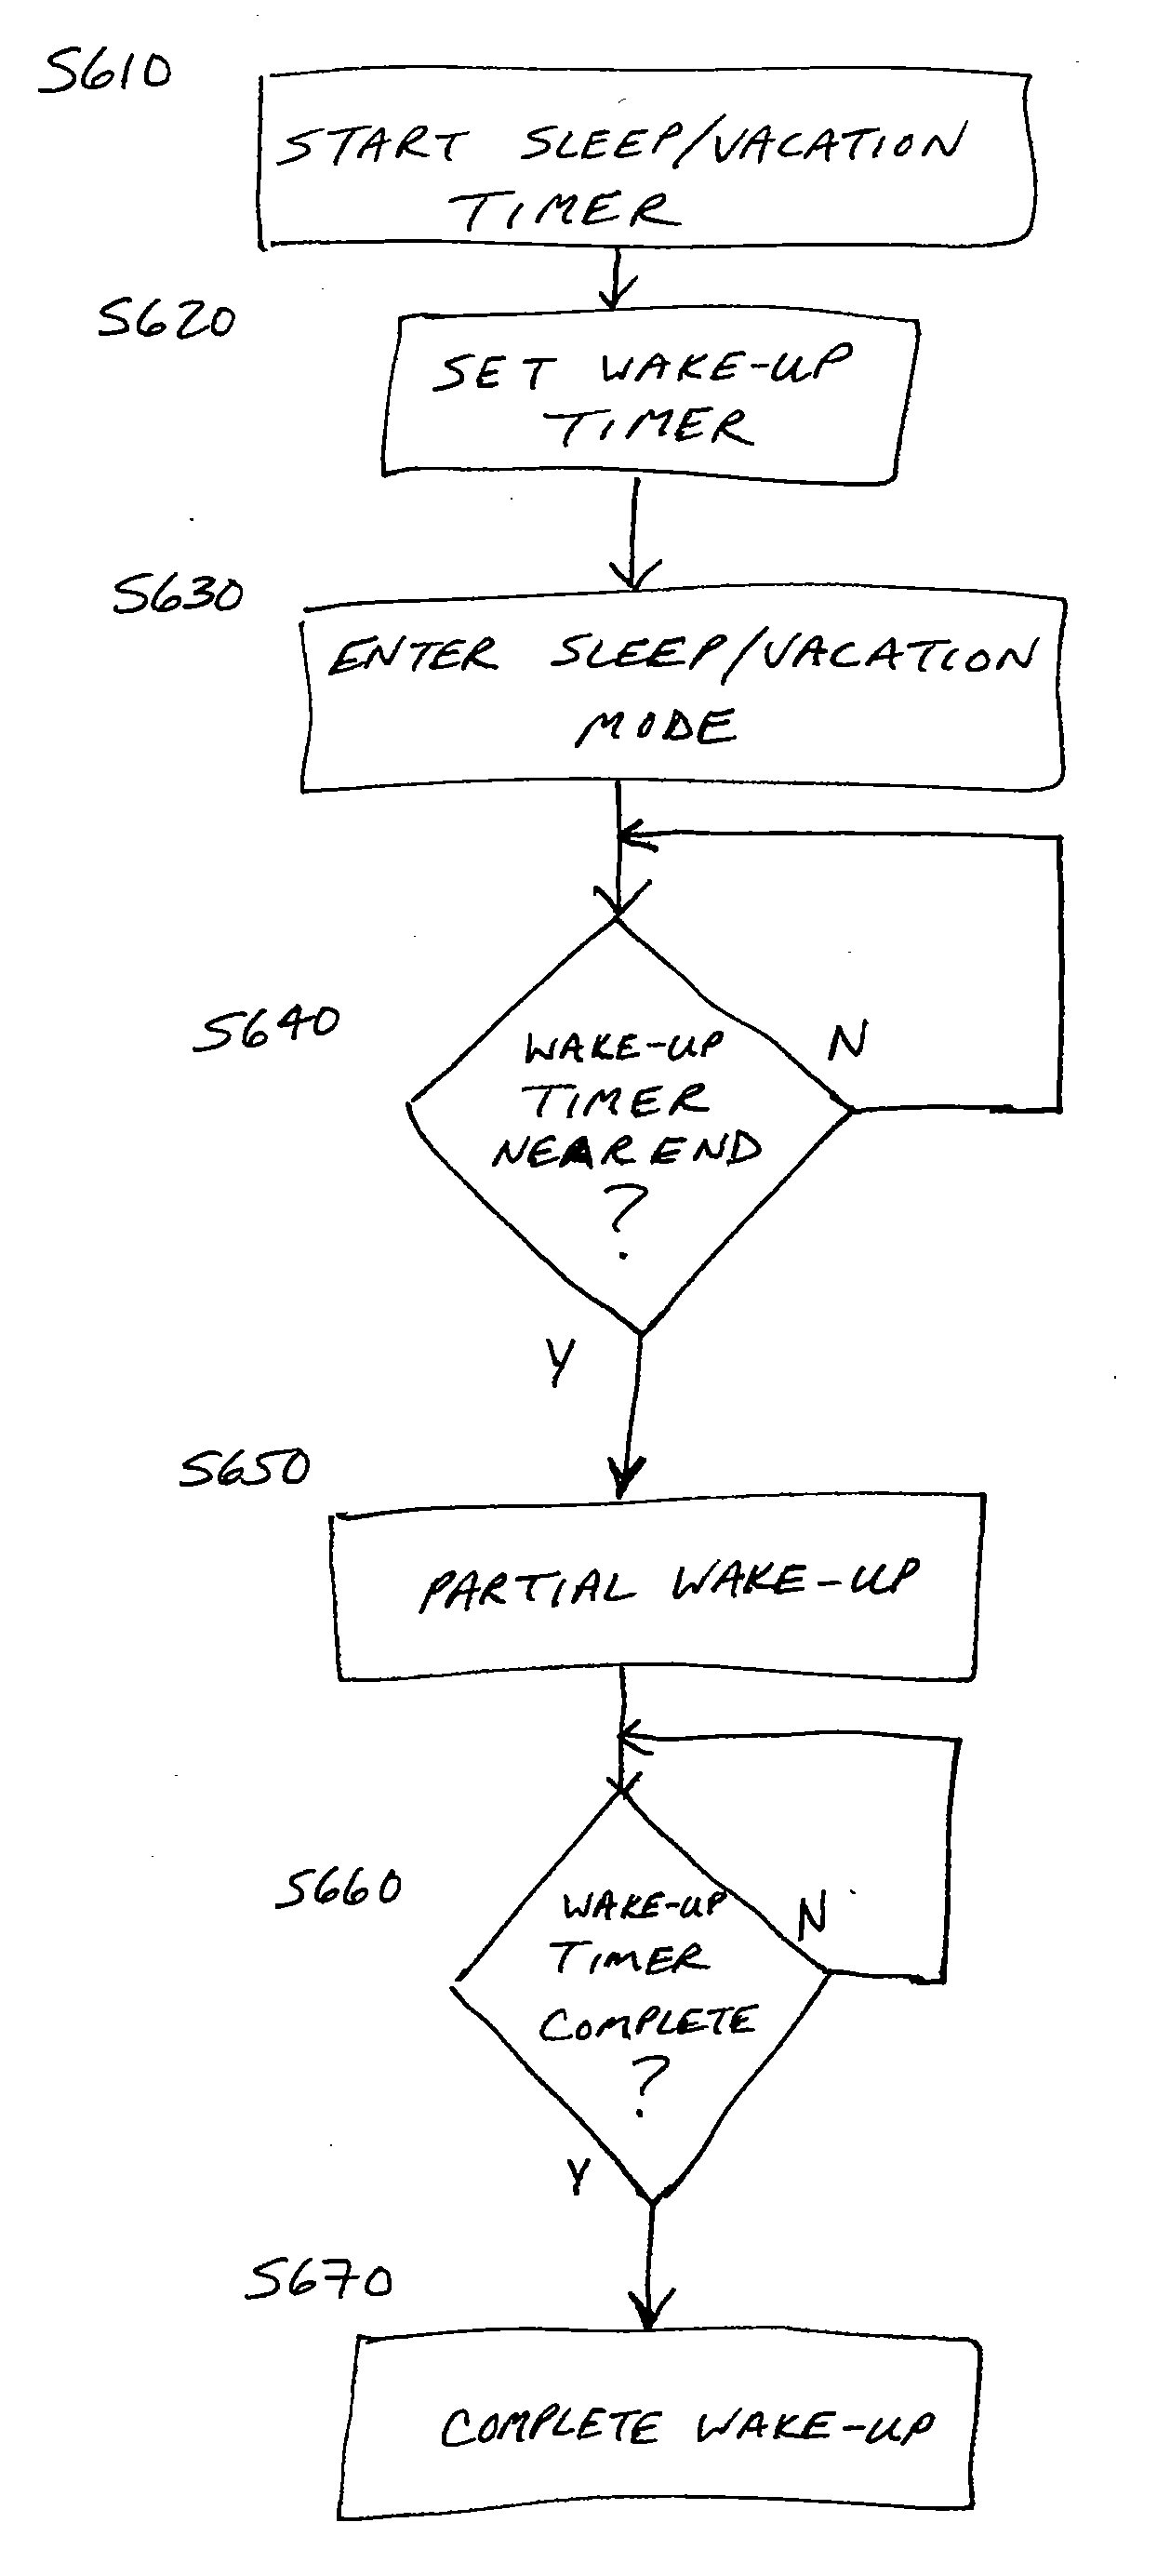 Systems and Methods for Controlling Power Consumption in Electronic Devices